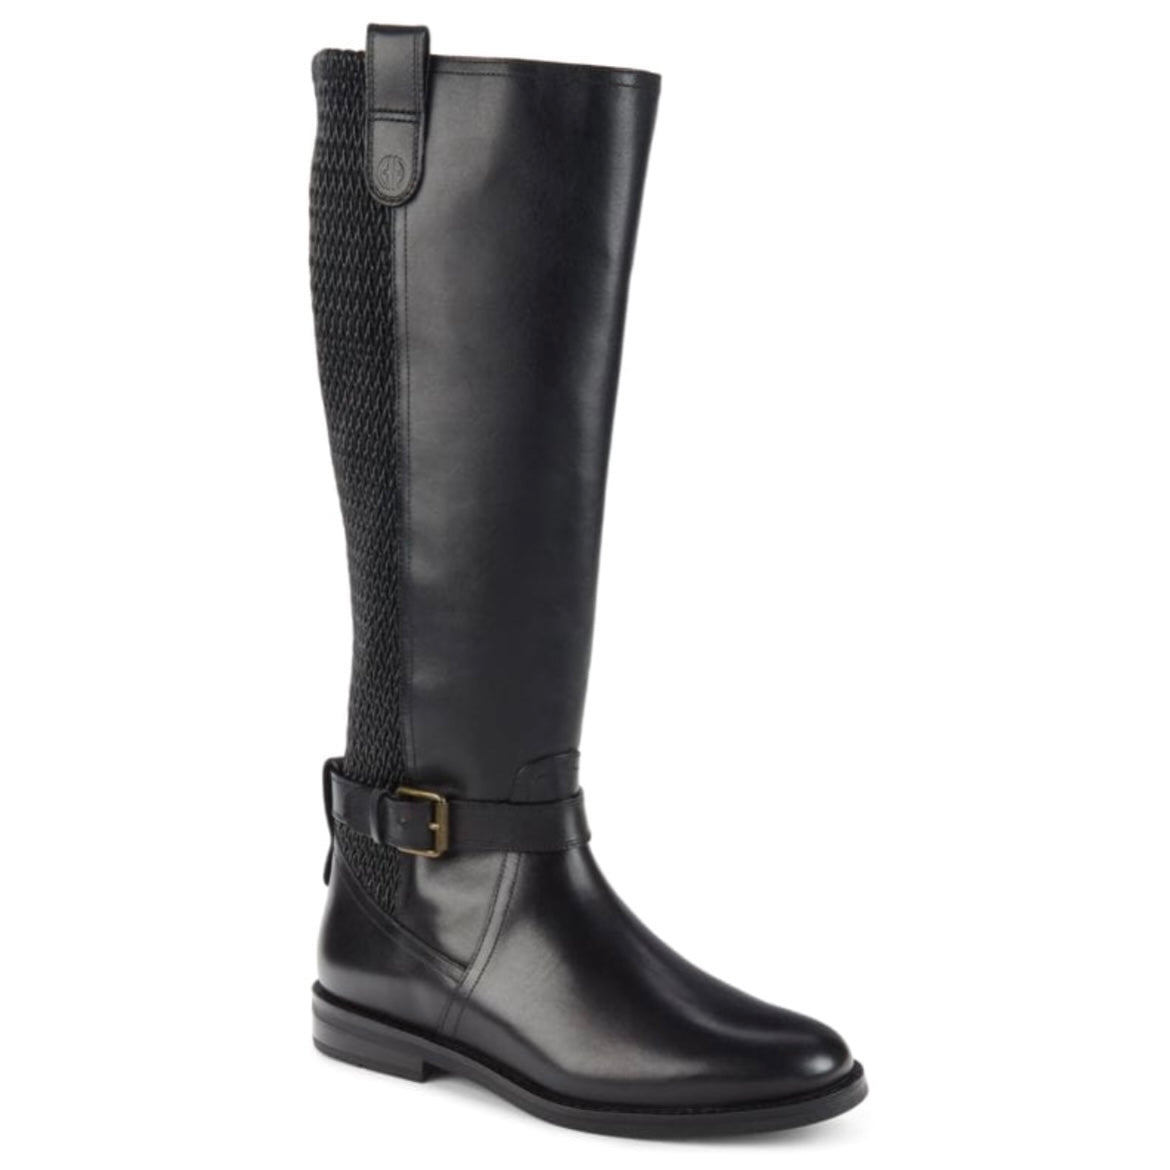 CAPE STRETCH Belted Leather Knee High Black Women's Boots